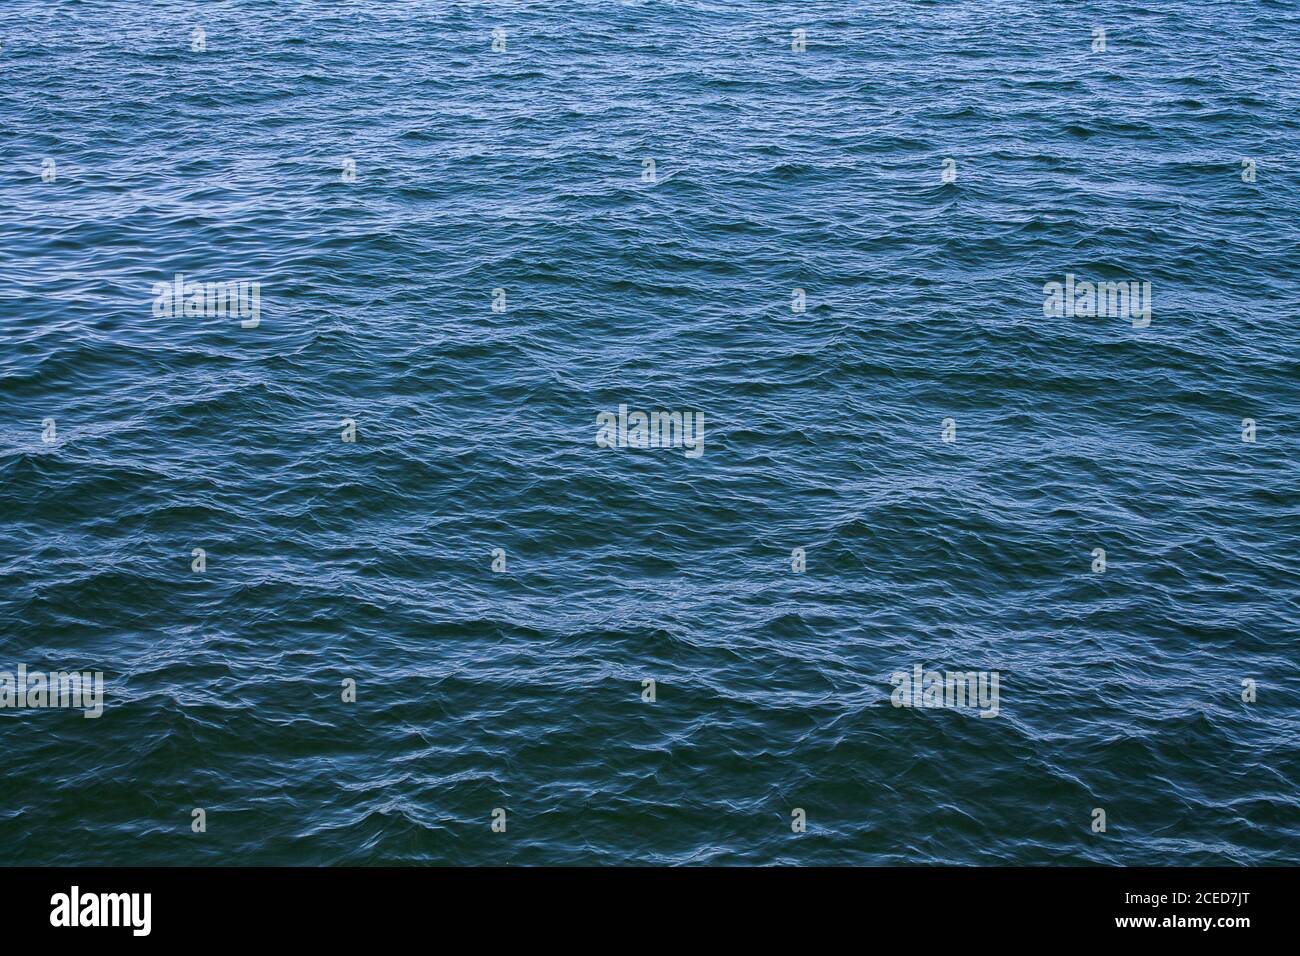 Texture sea water with almost no waves. Stock Photo